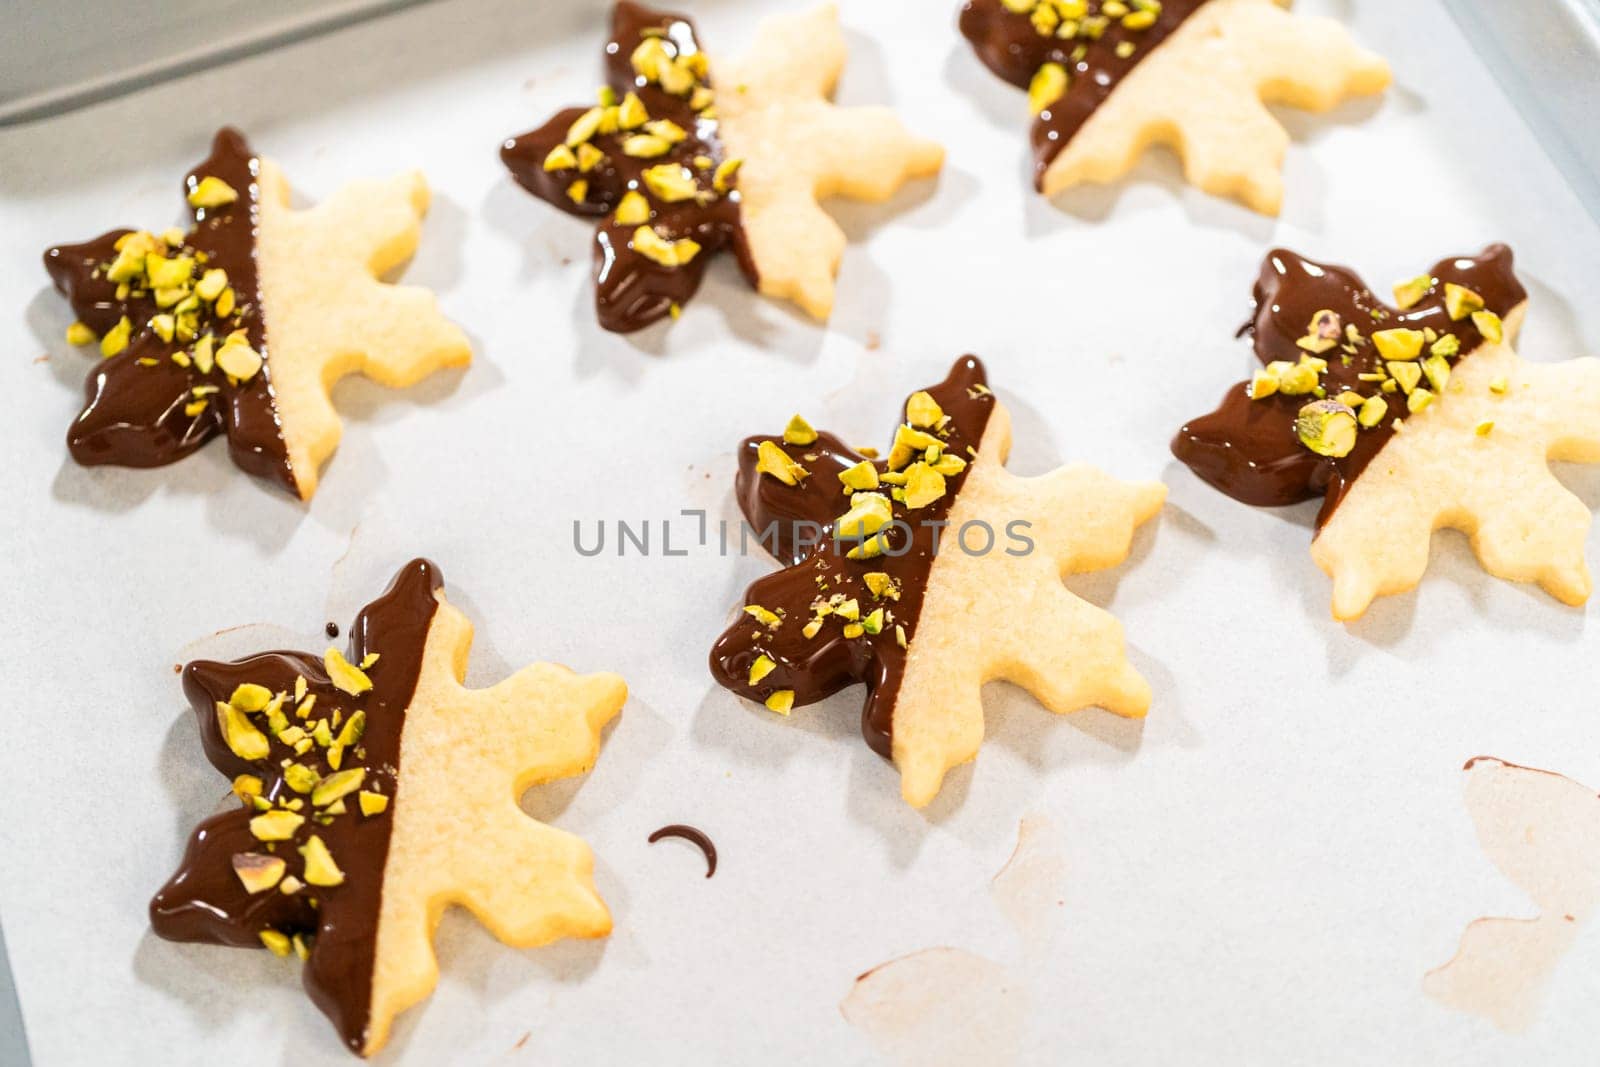 Making Holiday Star Cookies, Chocolate-Dipped with Pistachio Topping by arinahabich